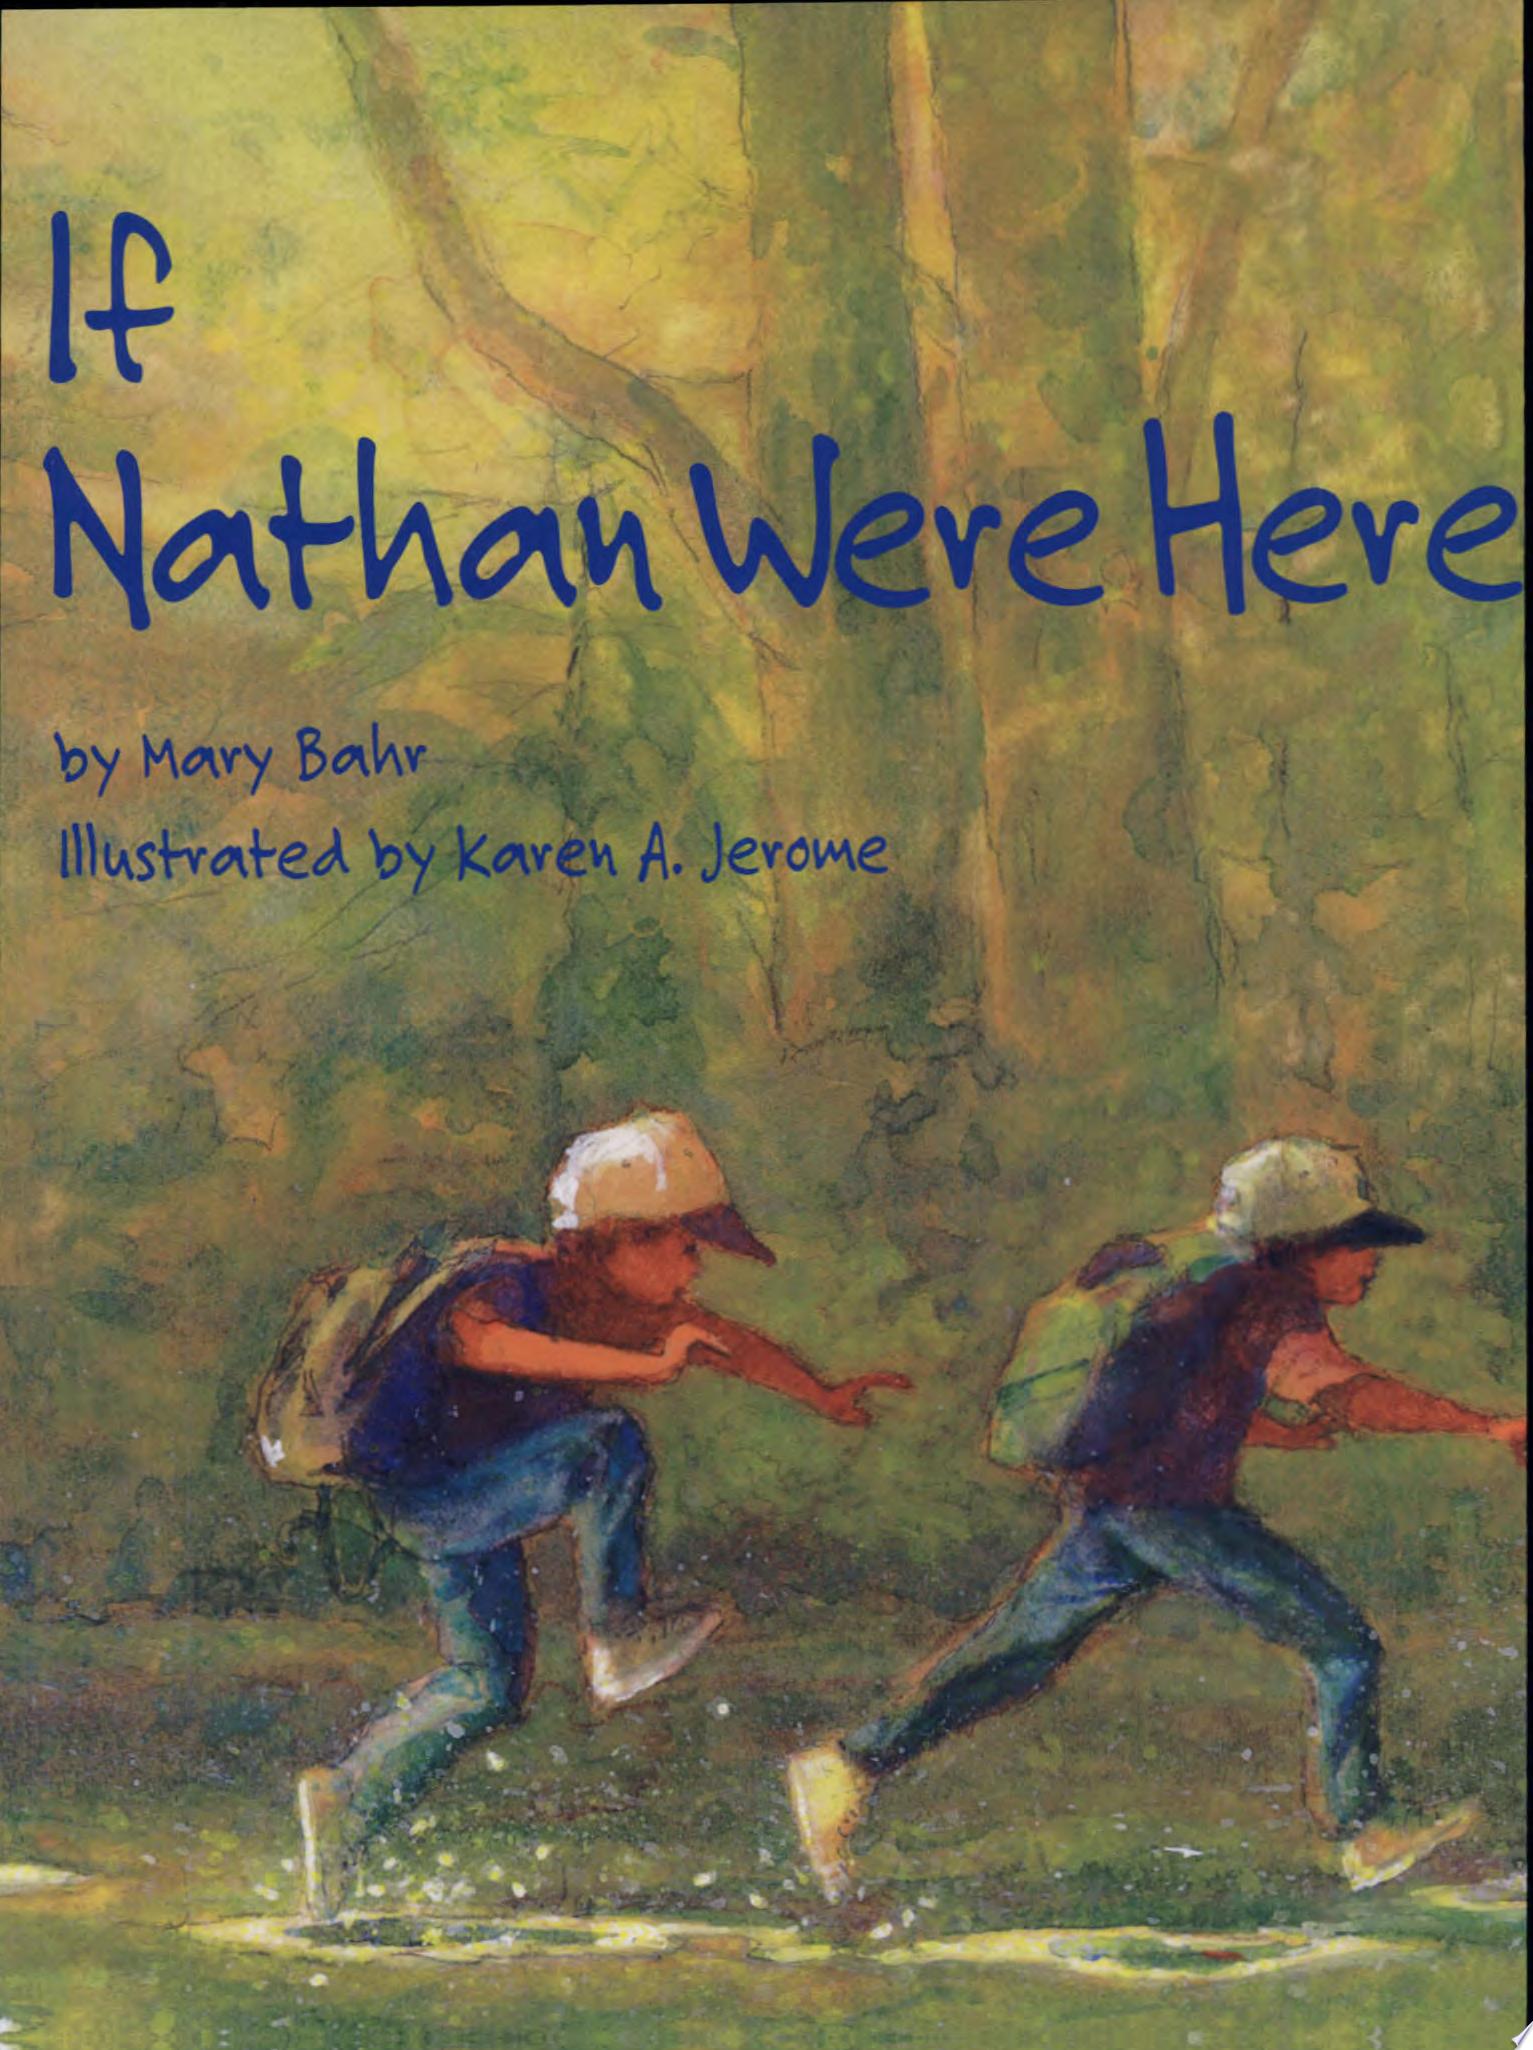 Image for "If Nathan Were Here"